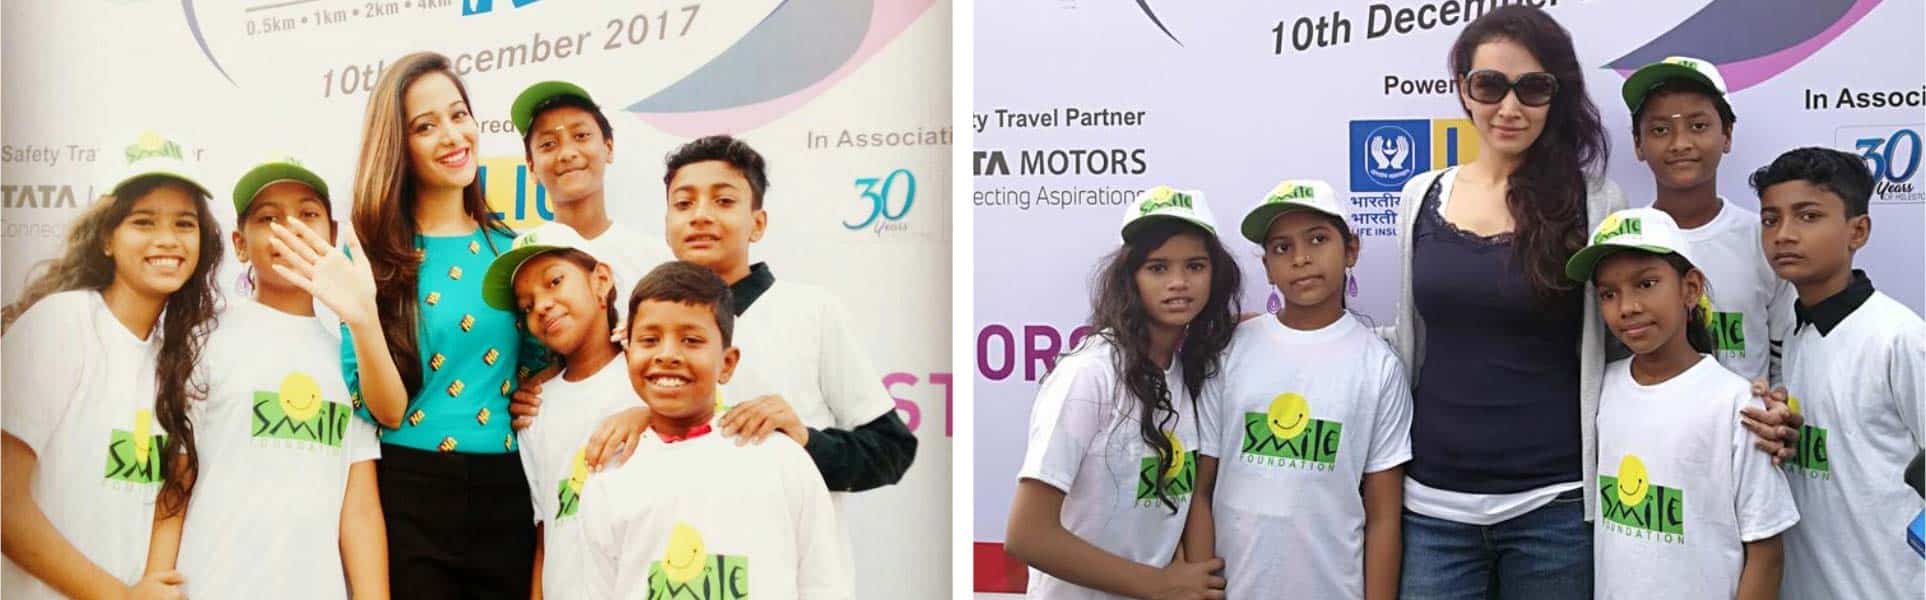 Smile participates in the Mumbai Juniorthon for the second consecutive year